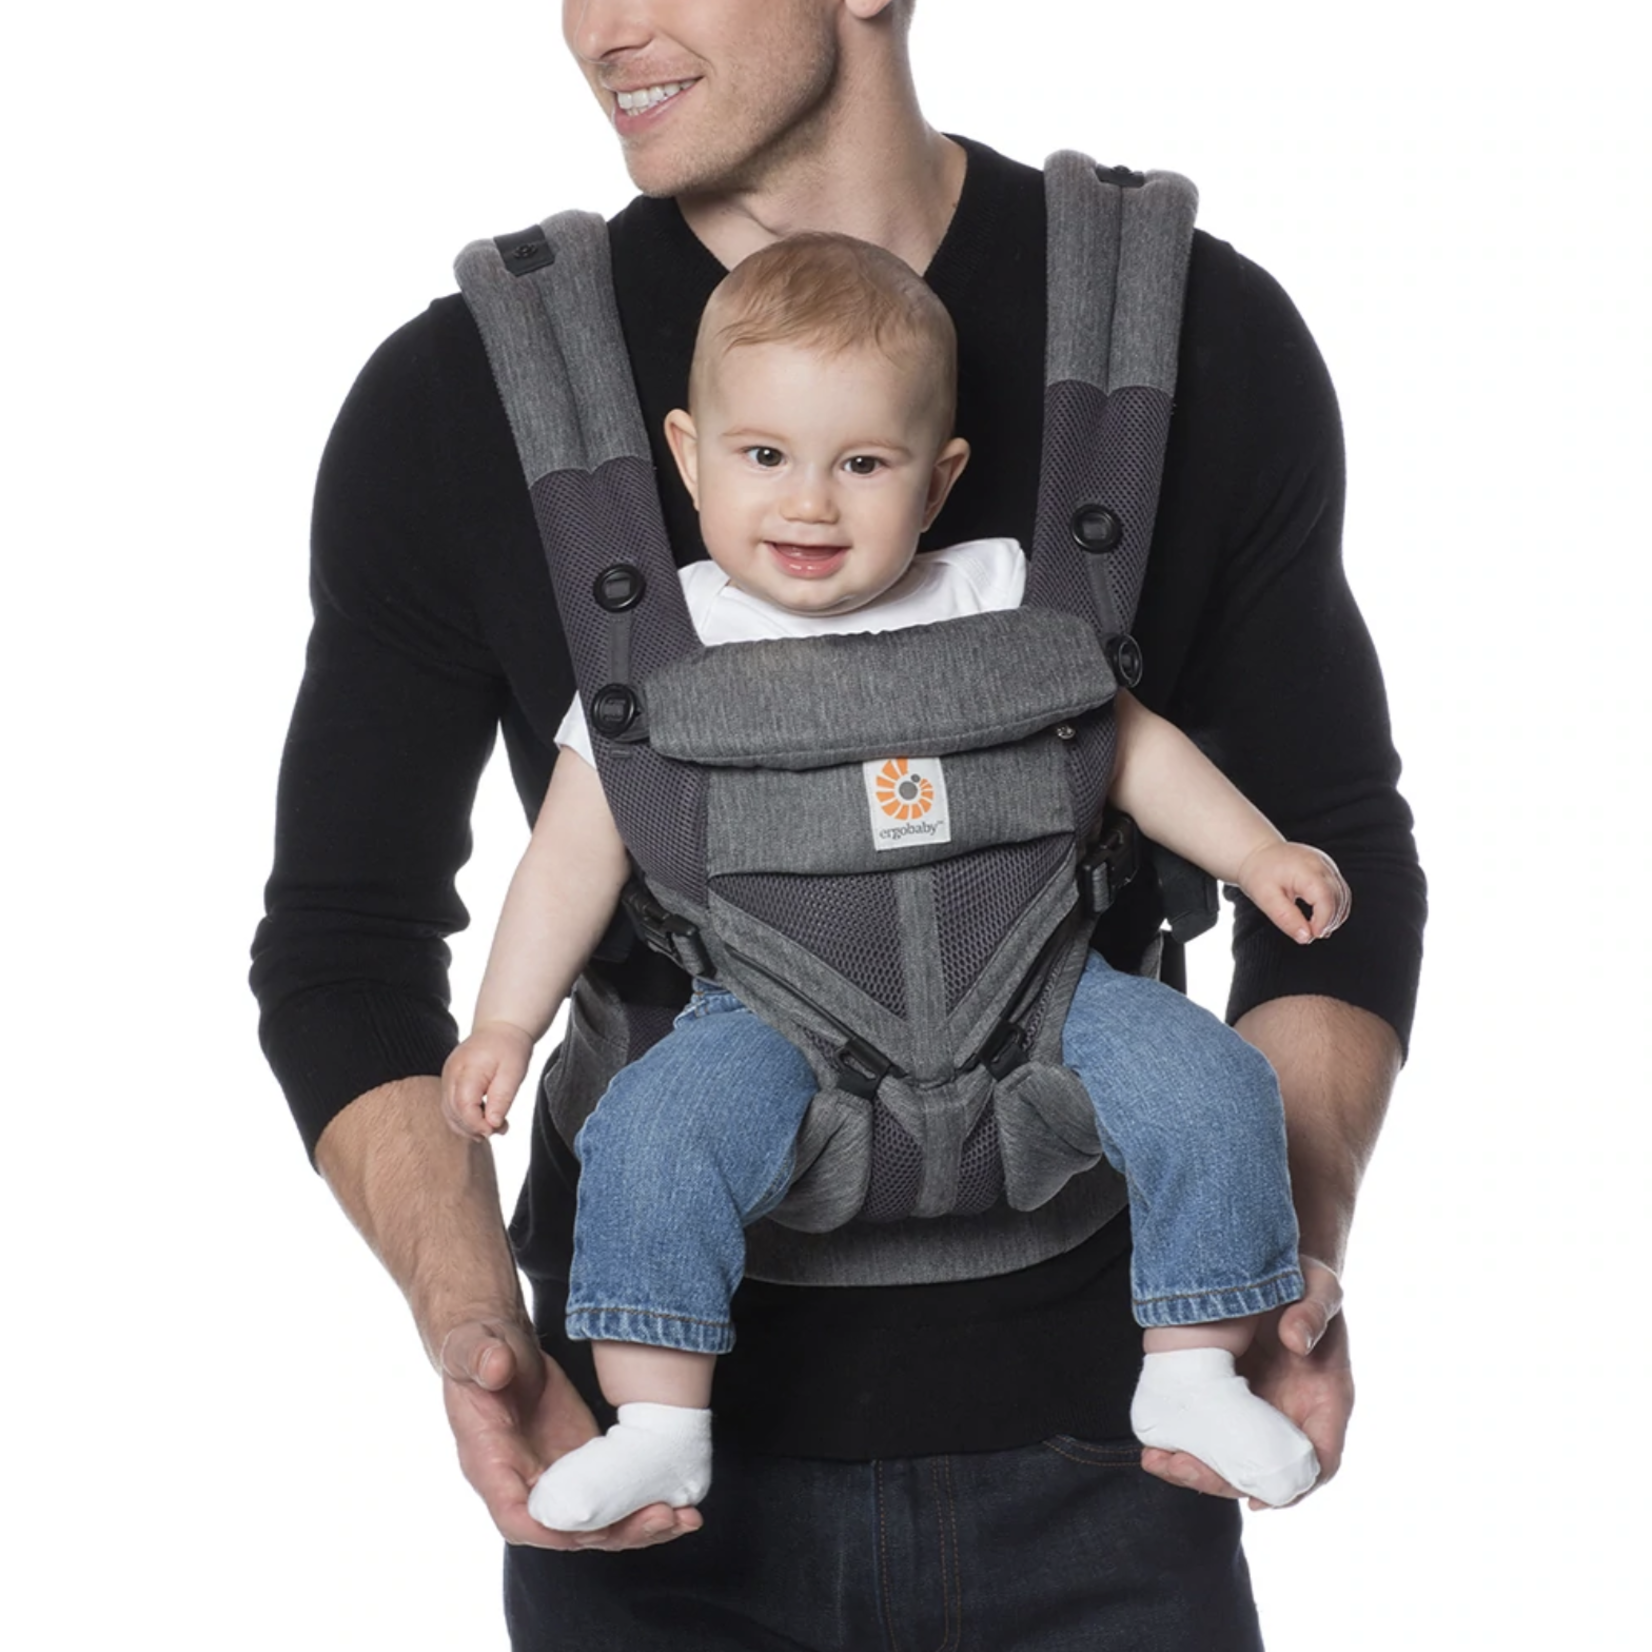 ERGOBABY OMNI 360 COOL AIR MESH BABY CARRIER- CLASSIC WEAVE